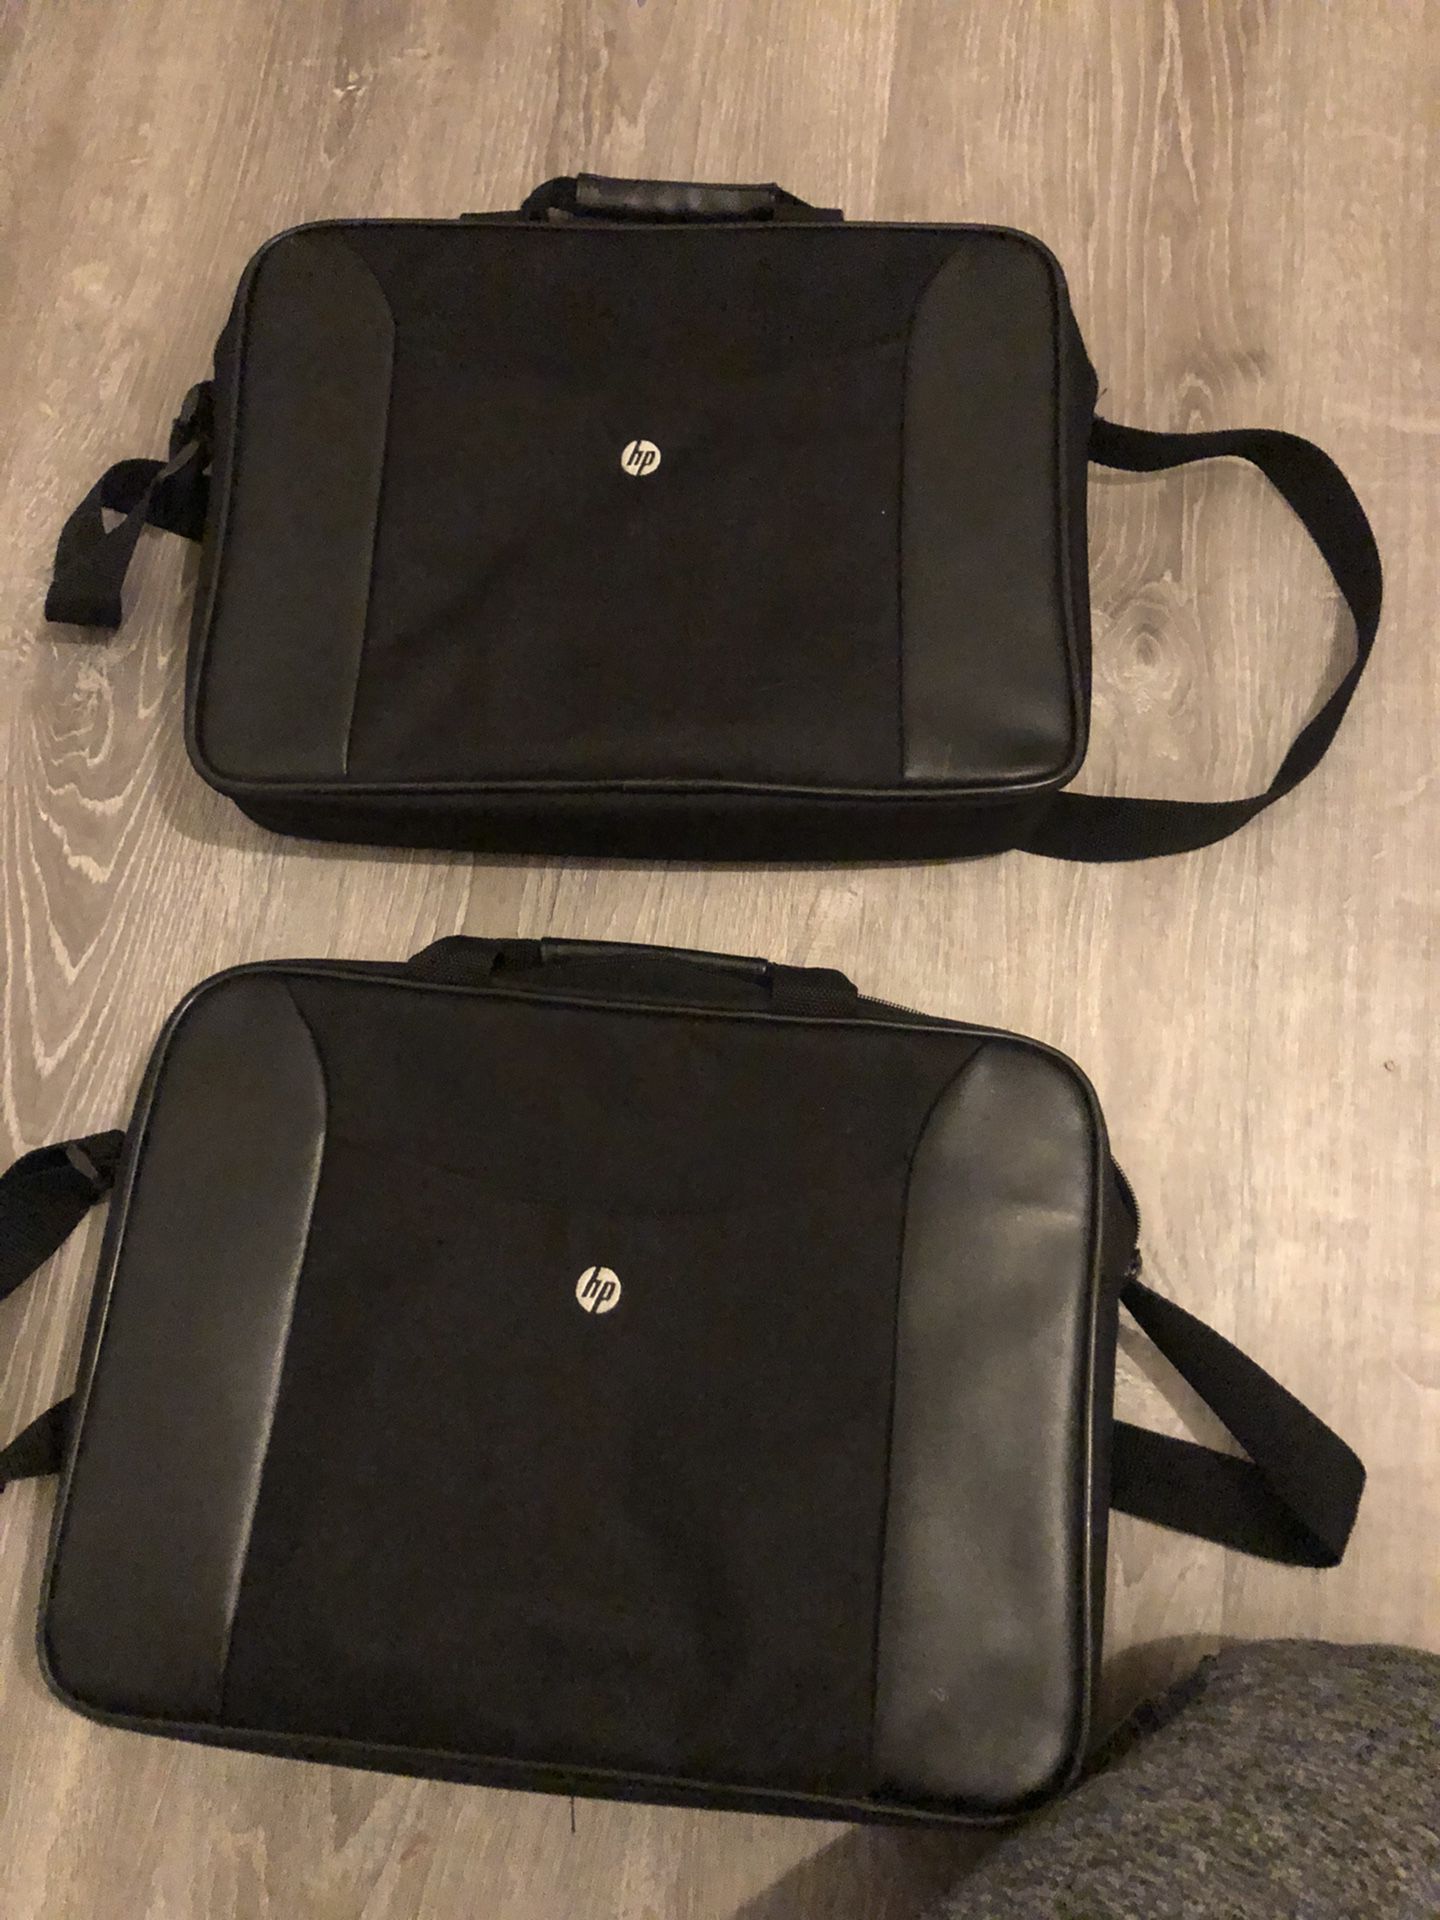 HP Laptop Case with strap